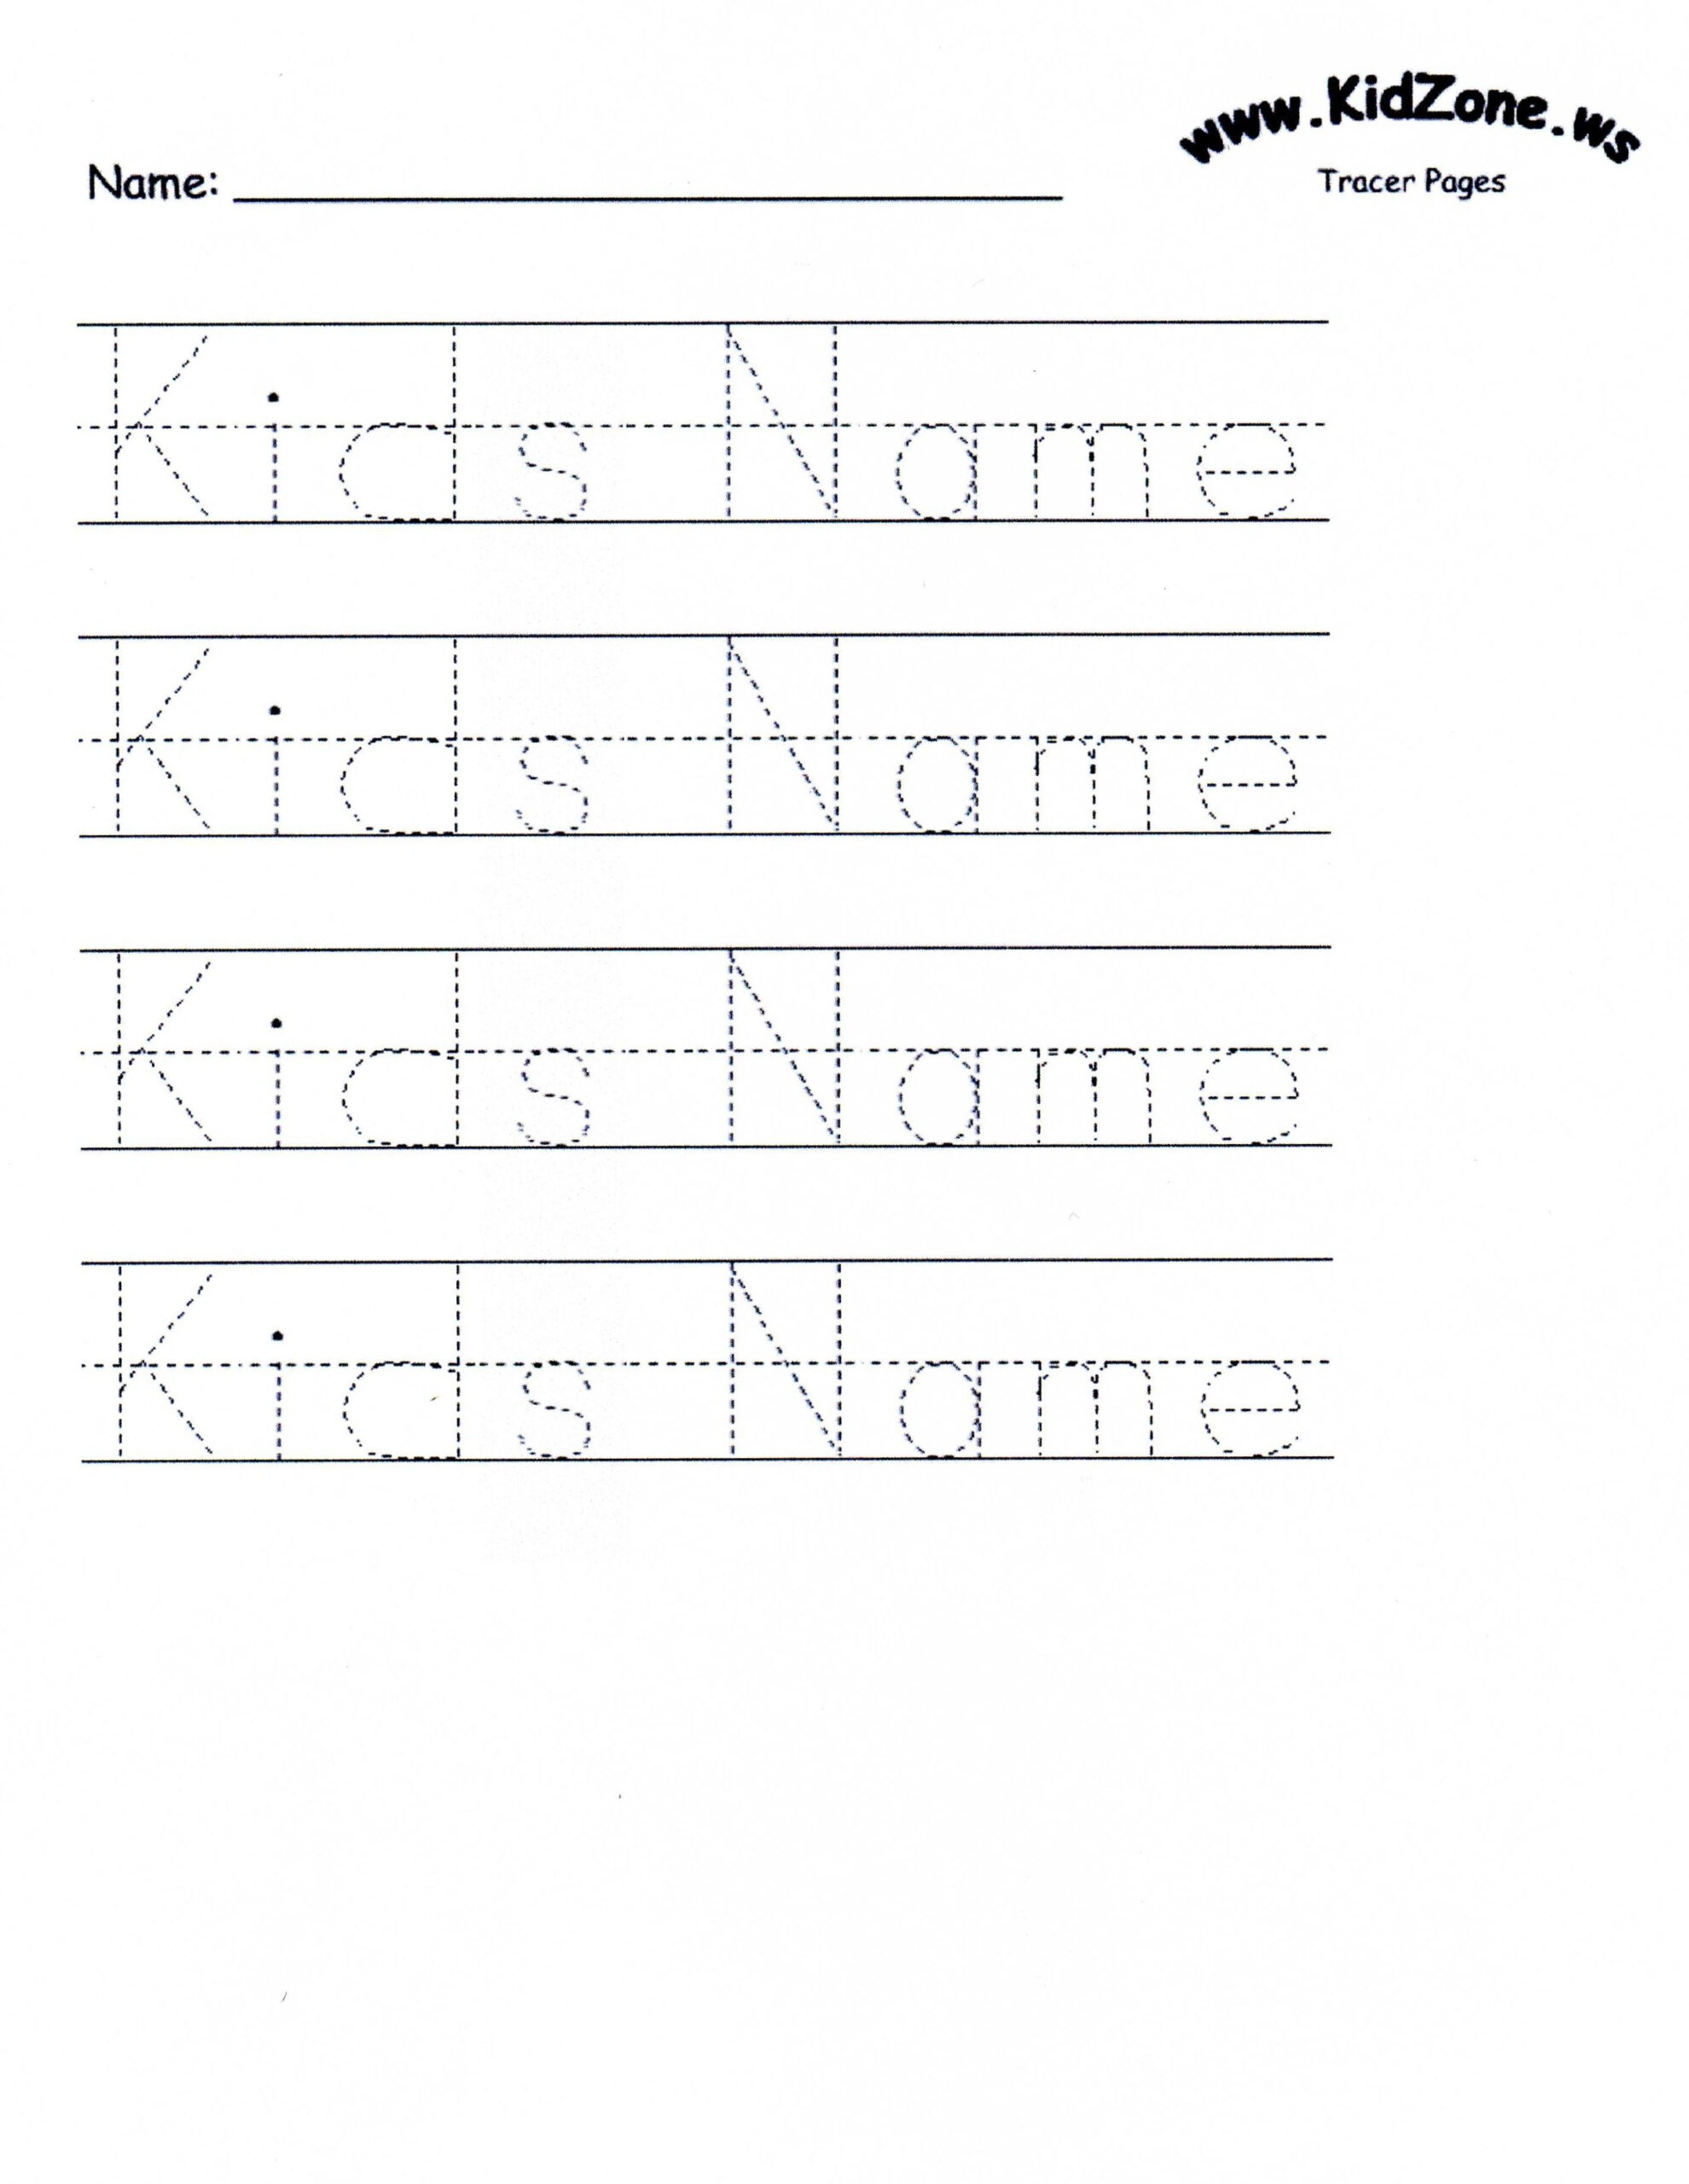 Custom Tracer Pages | Name Tracing Worksheets, Tracing inside Preschool Name Tracing Ideas